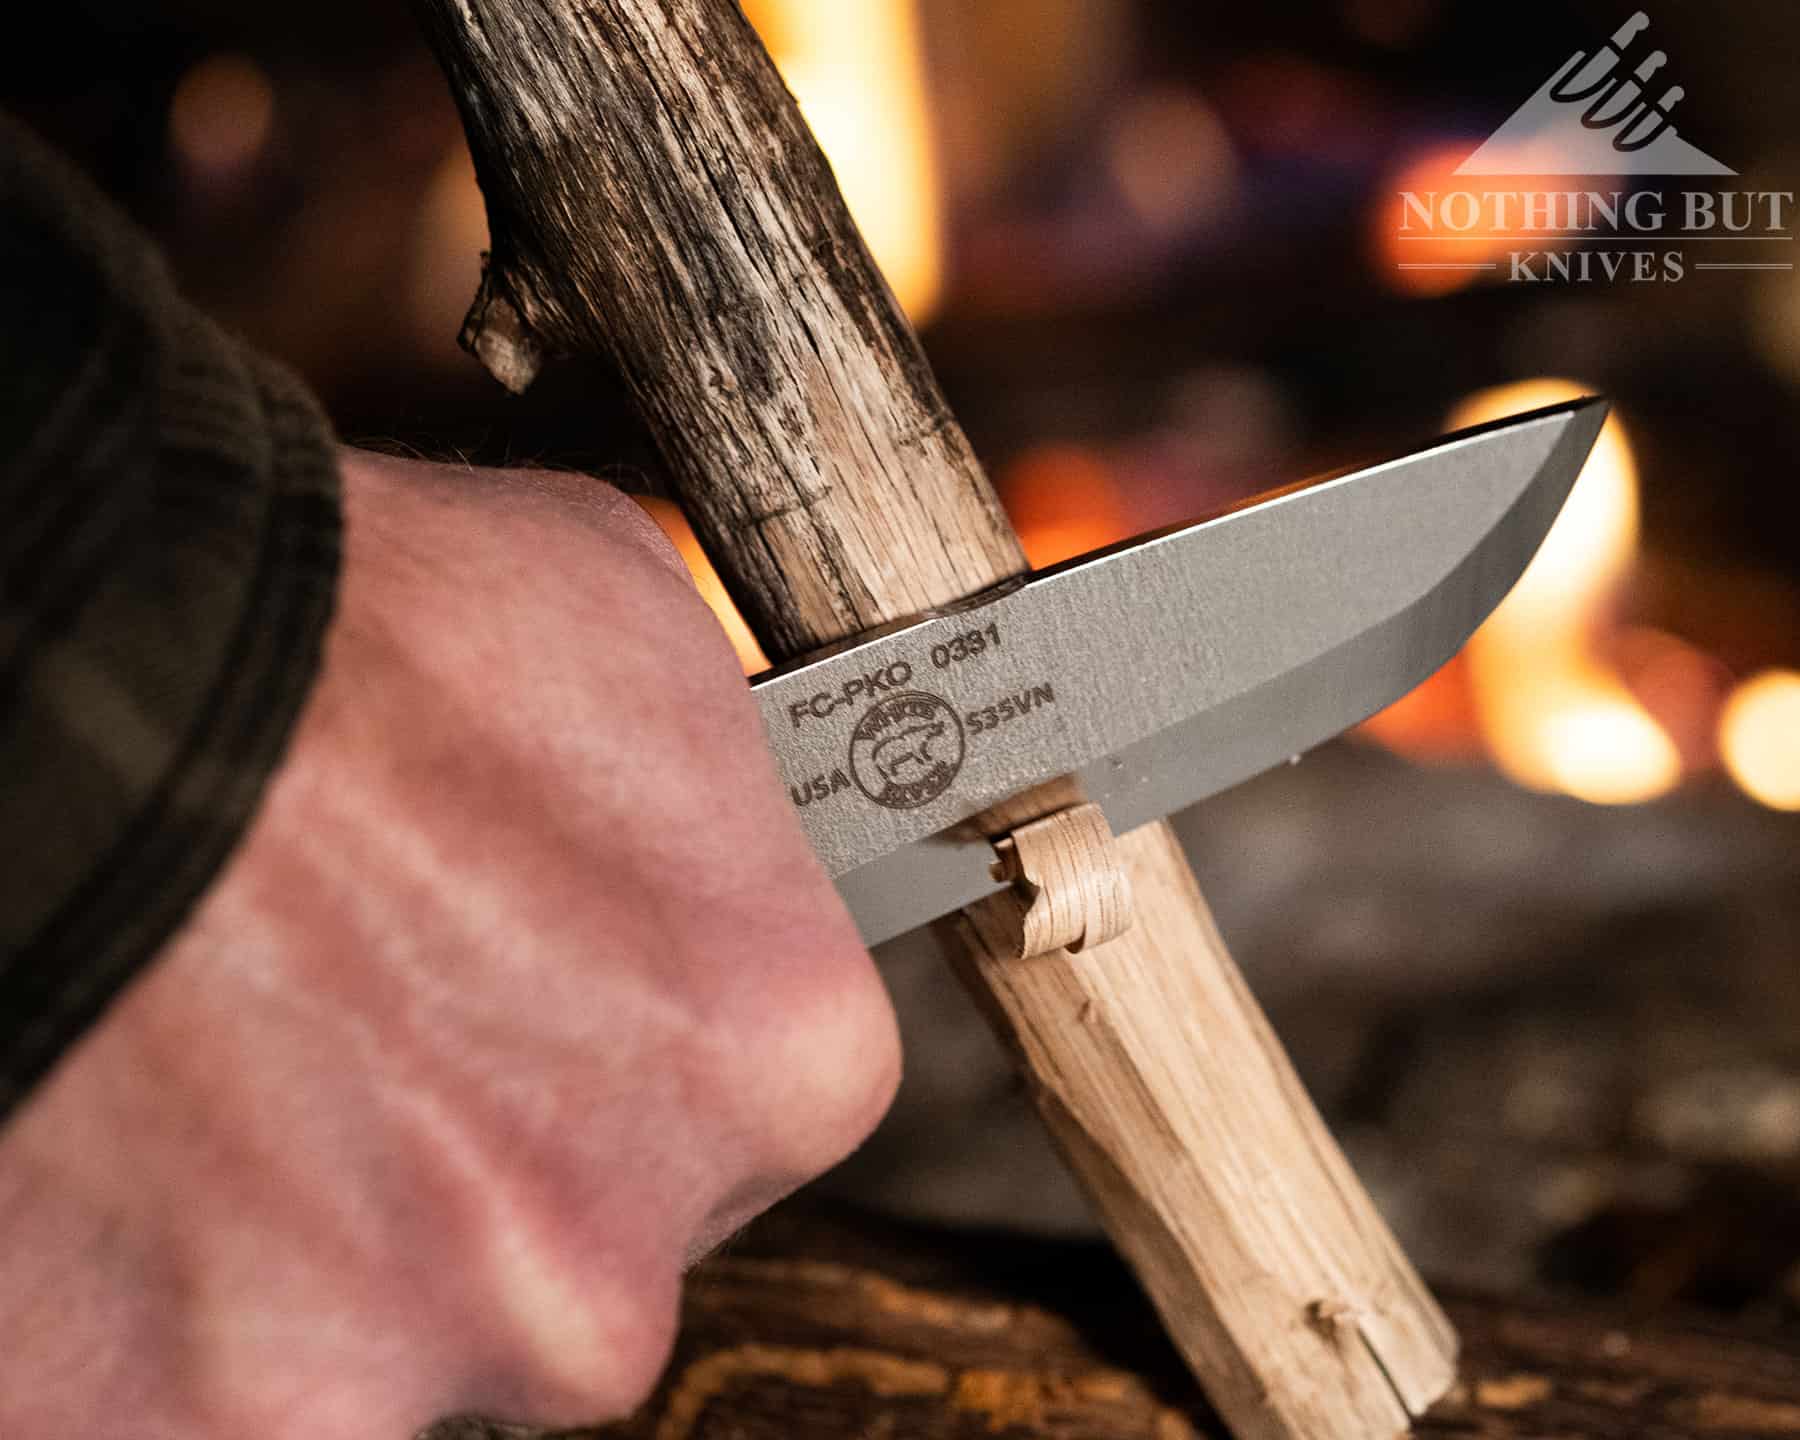 The short blade on the White River puts this squarely in my top 10 list of best survival knives. It is ideally sized for work without being too big to carry.